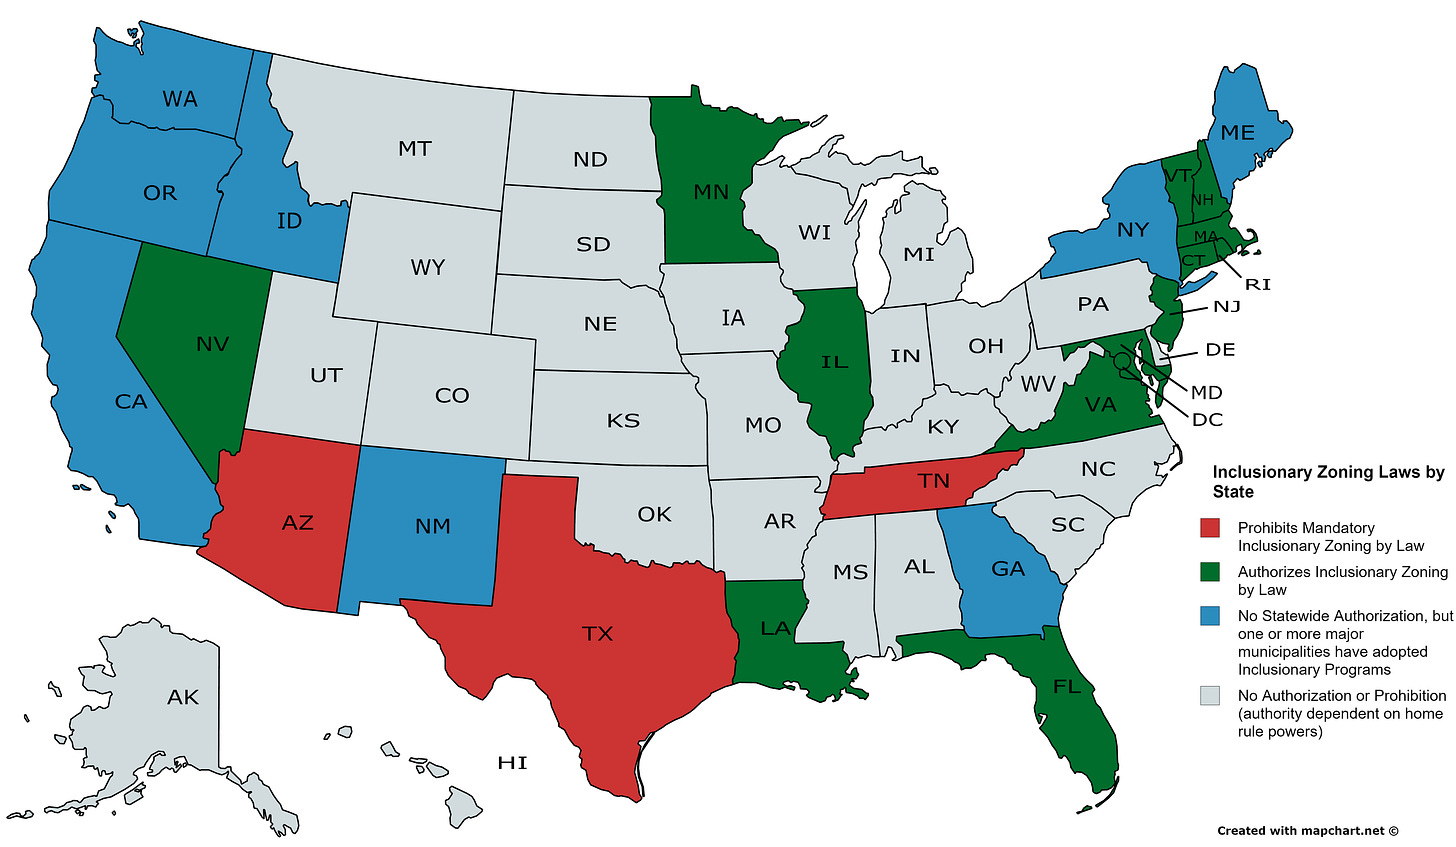 inclusionary-zoning-laws-by-state-1 - Inclusionary Housing